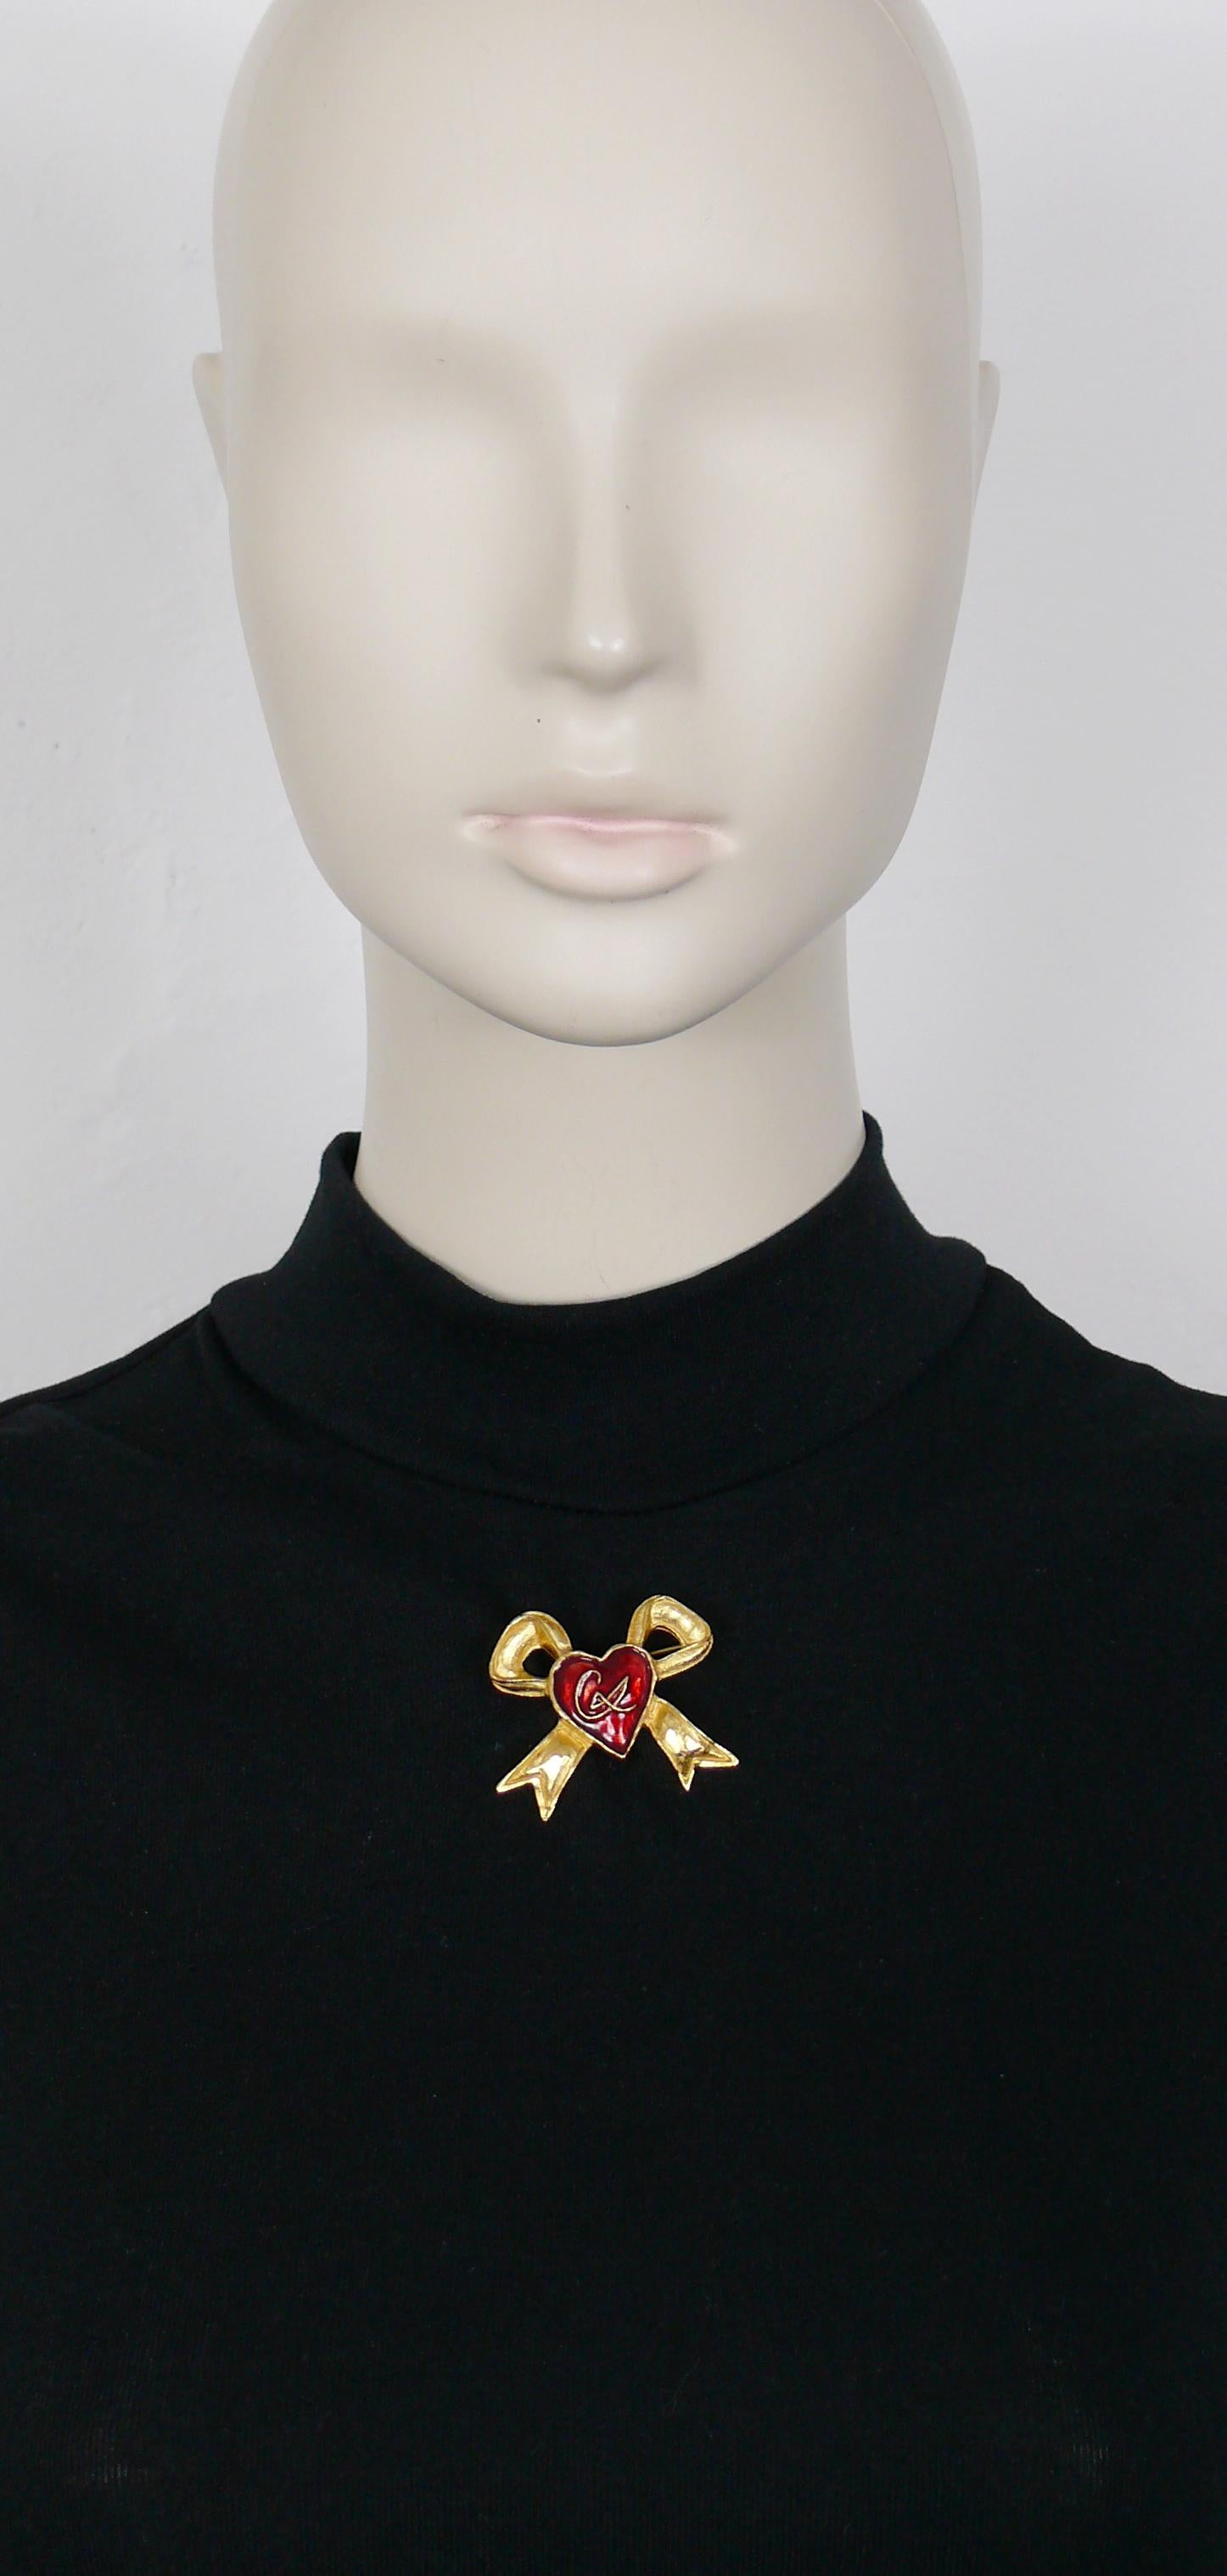 CHRISTIAN LACROIX vintage gold toned ribbon bow design brooch featuring a red enamel heart at the center with CL monogram.

Marked CHRISTIAN LACROIX CL Made in France.

Indicative measurements : max. height approx. 3.6 cm (1.42 inches) / max. width